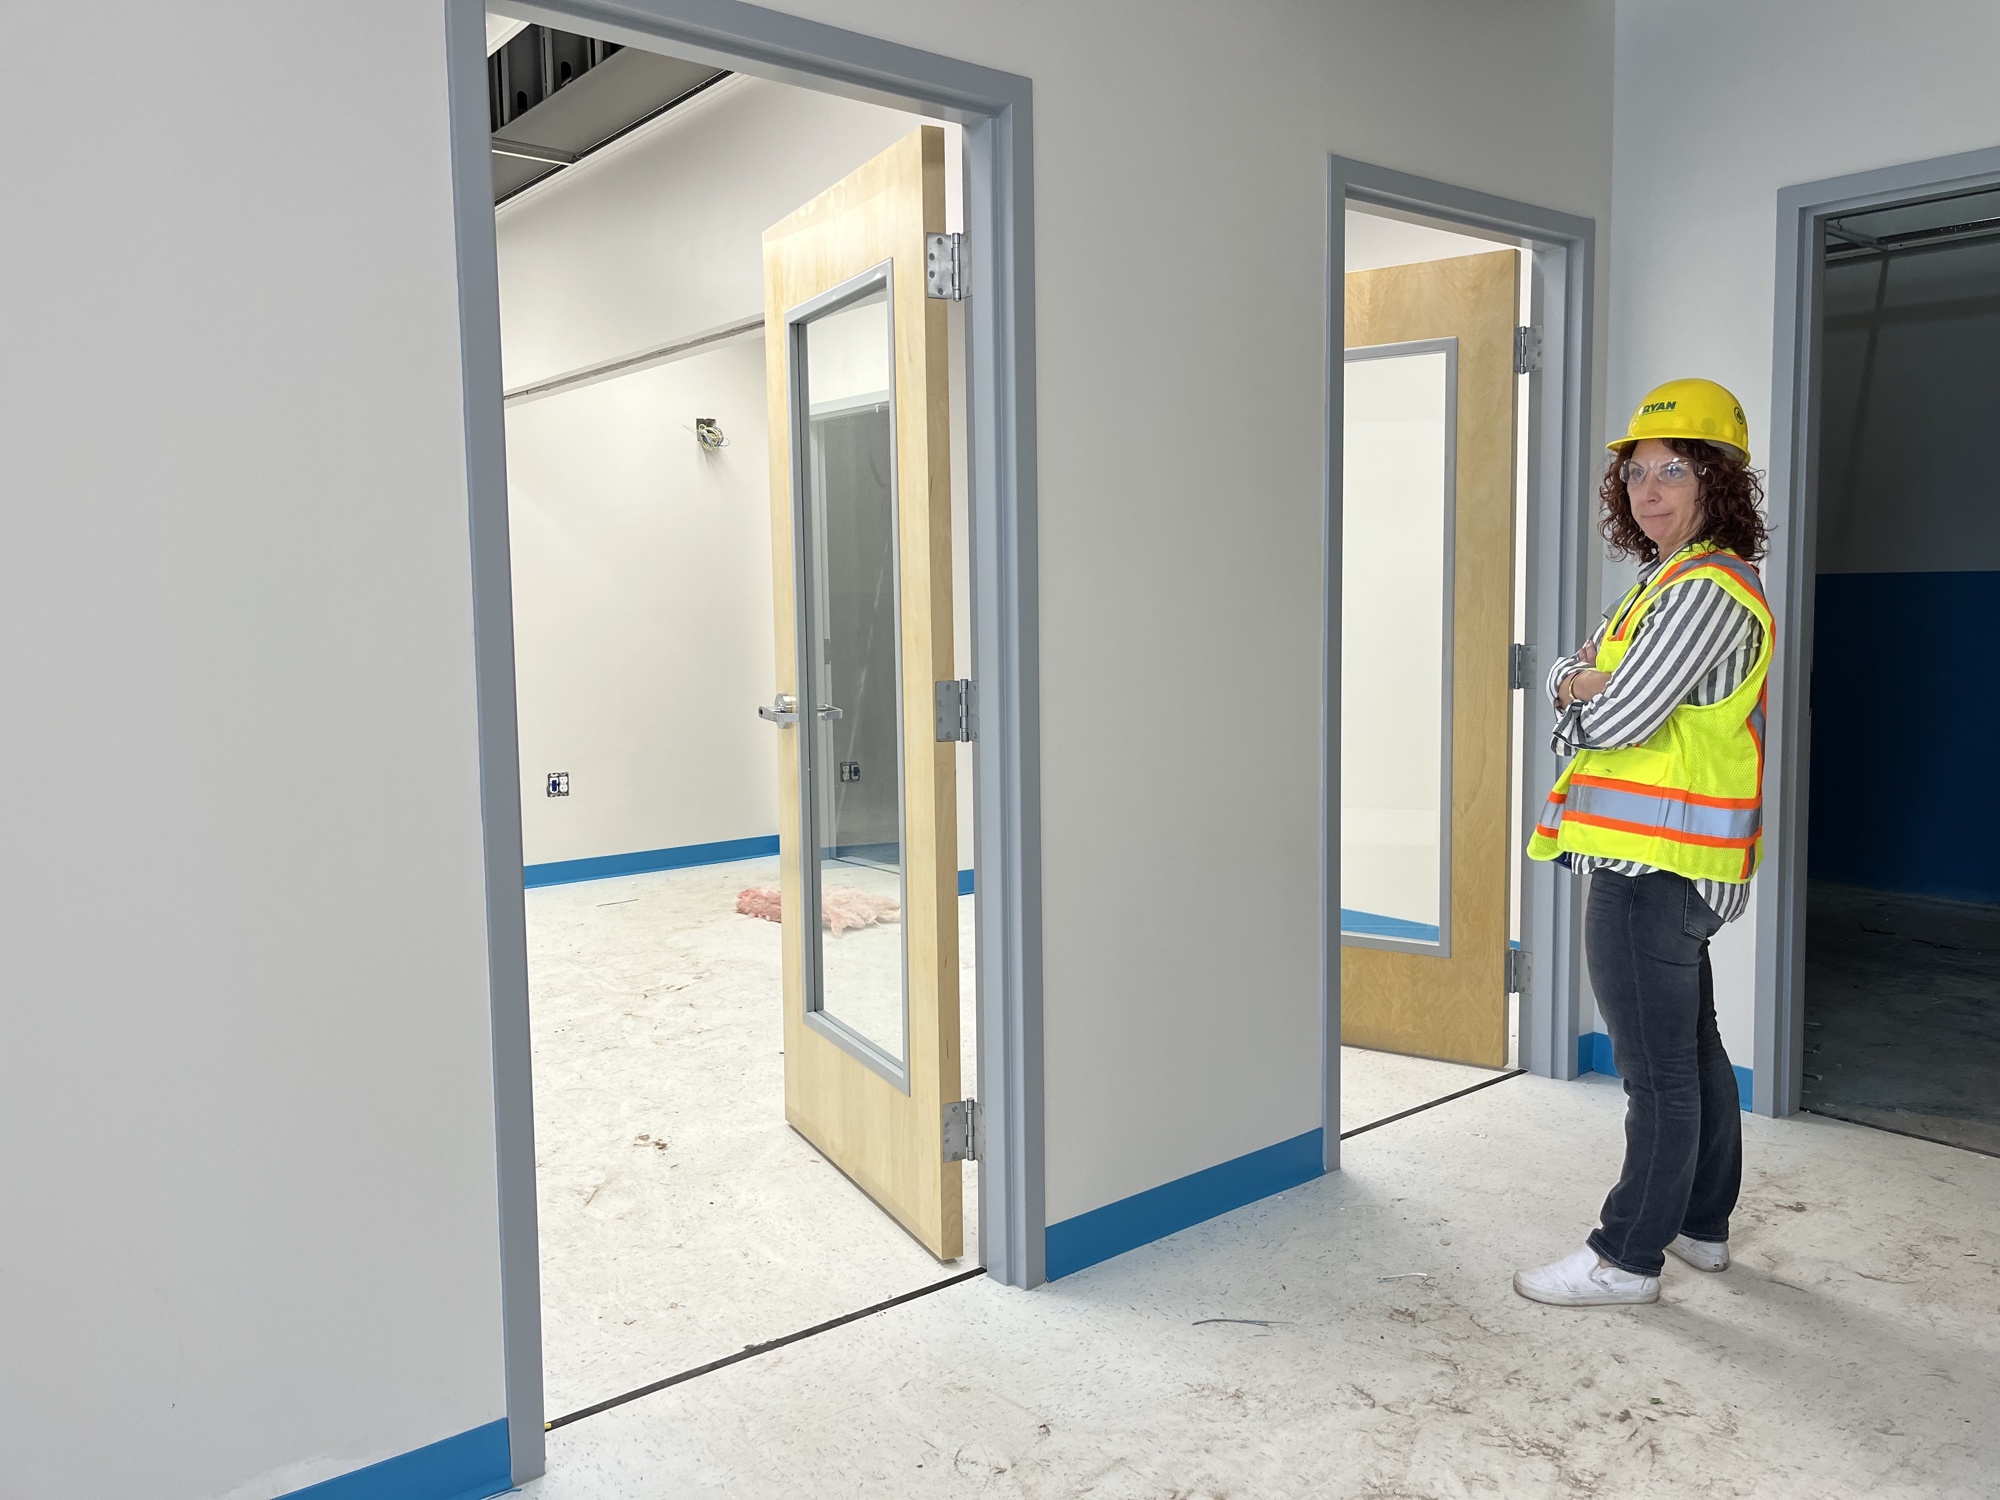 Cheryl Cendan, the principal of Lakewood Ranch Preparatory Academy's high school, says the breakout rooms will give teachers a chance to work with students in small groups. (Photo by Liz Ramos)